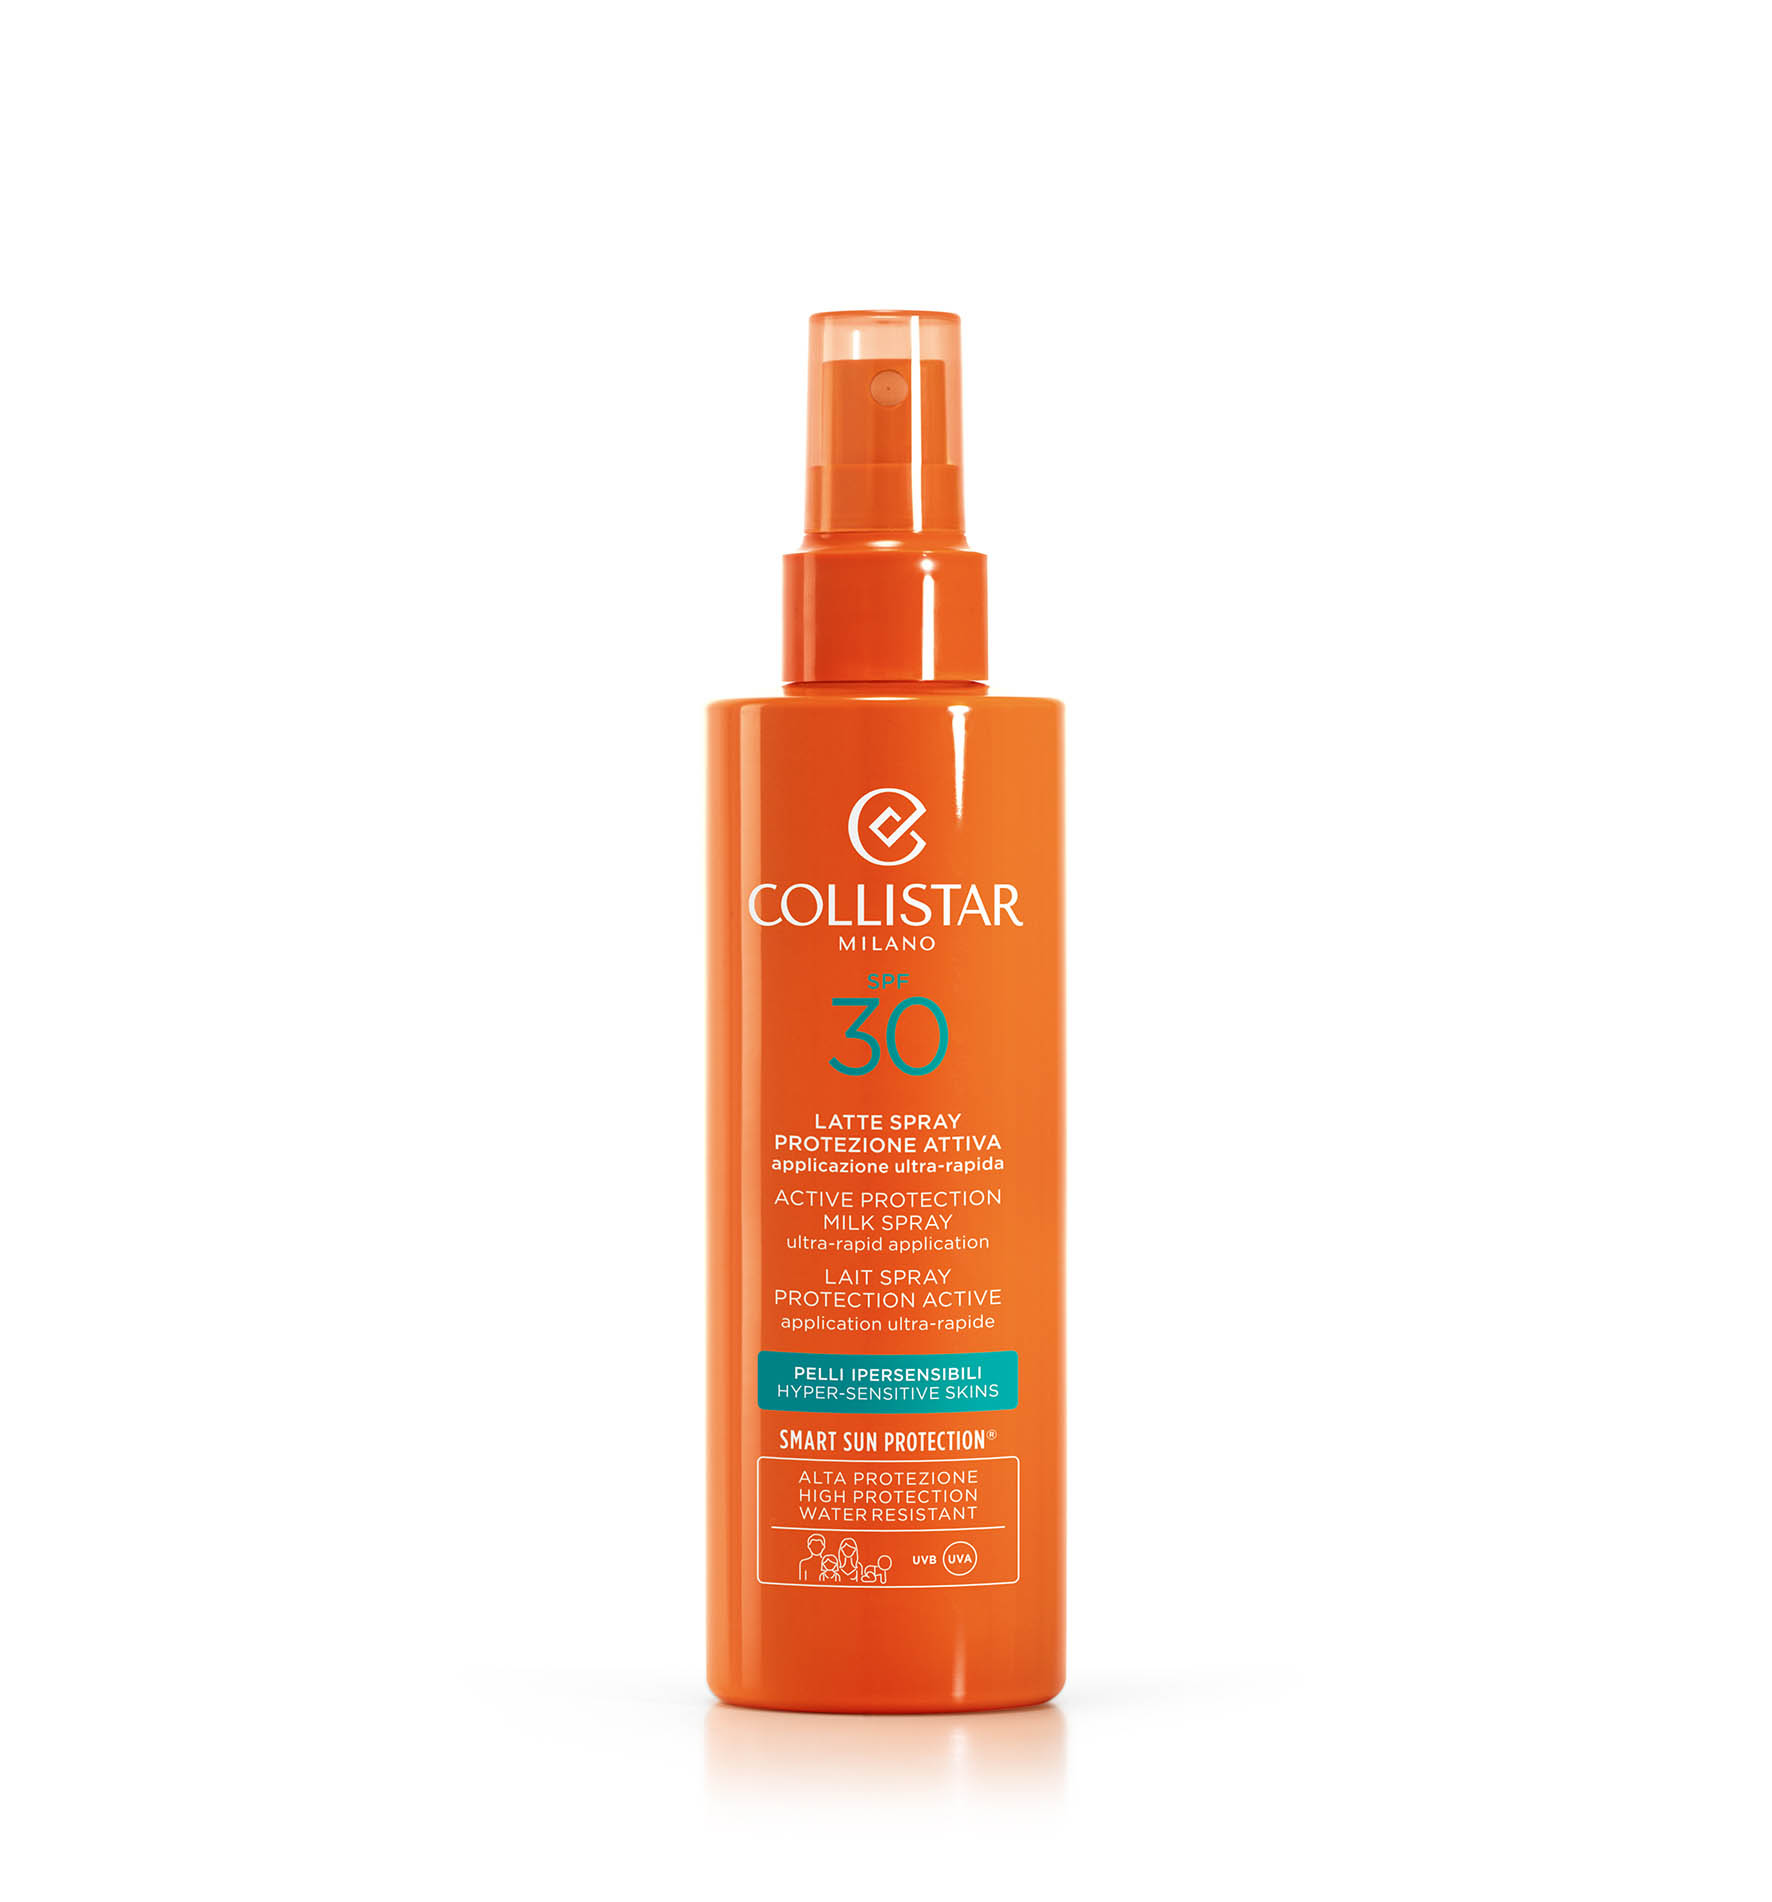 Collistar high-protection sunscreen products and creams